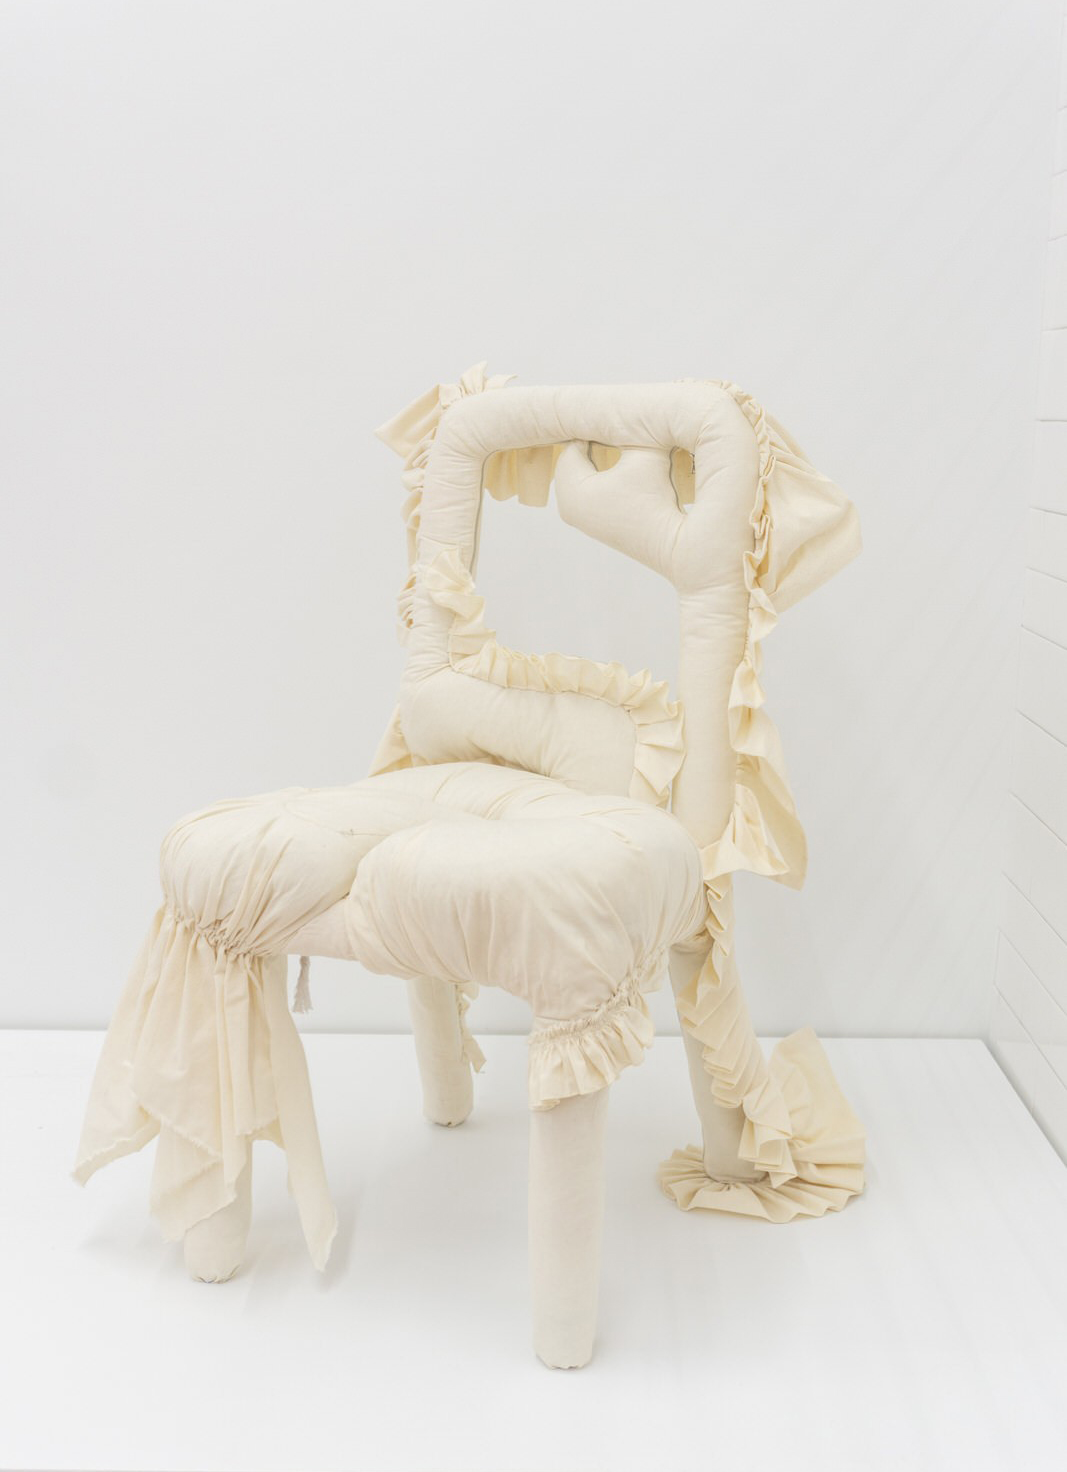 A white chair with ruffles on it.